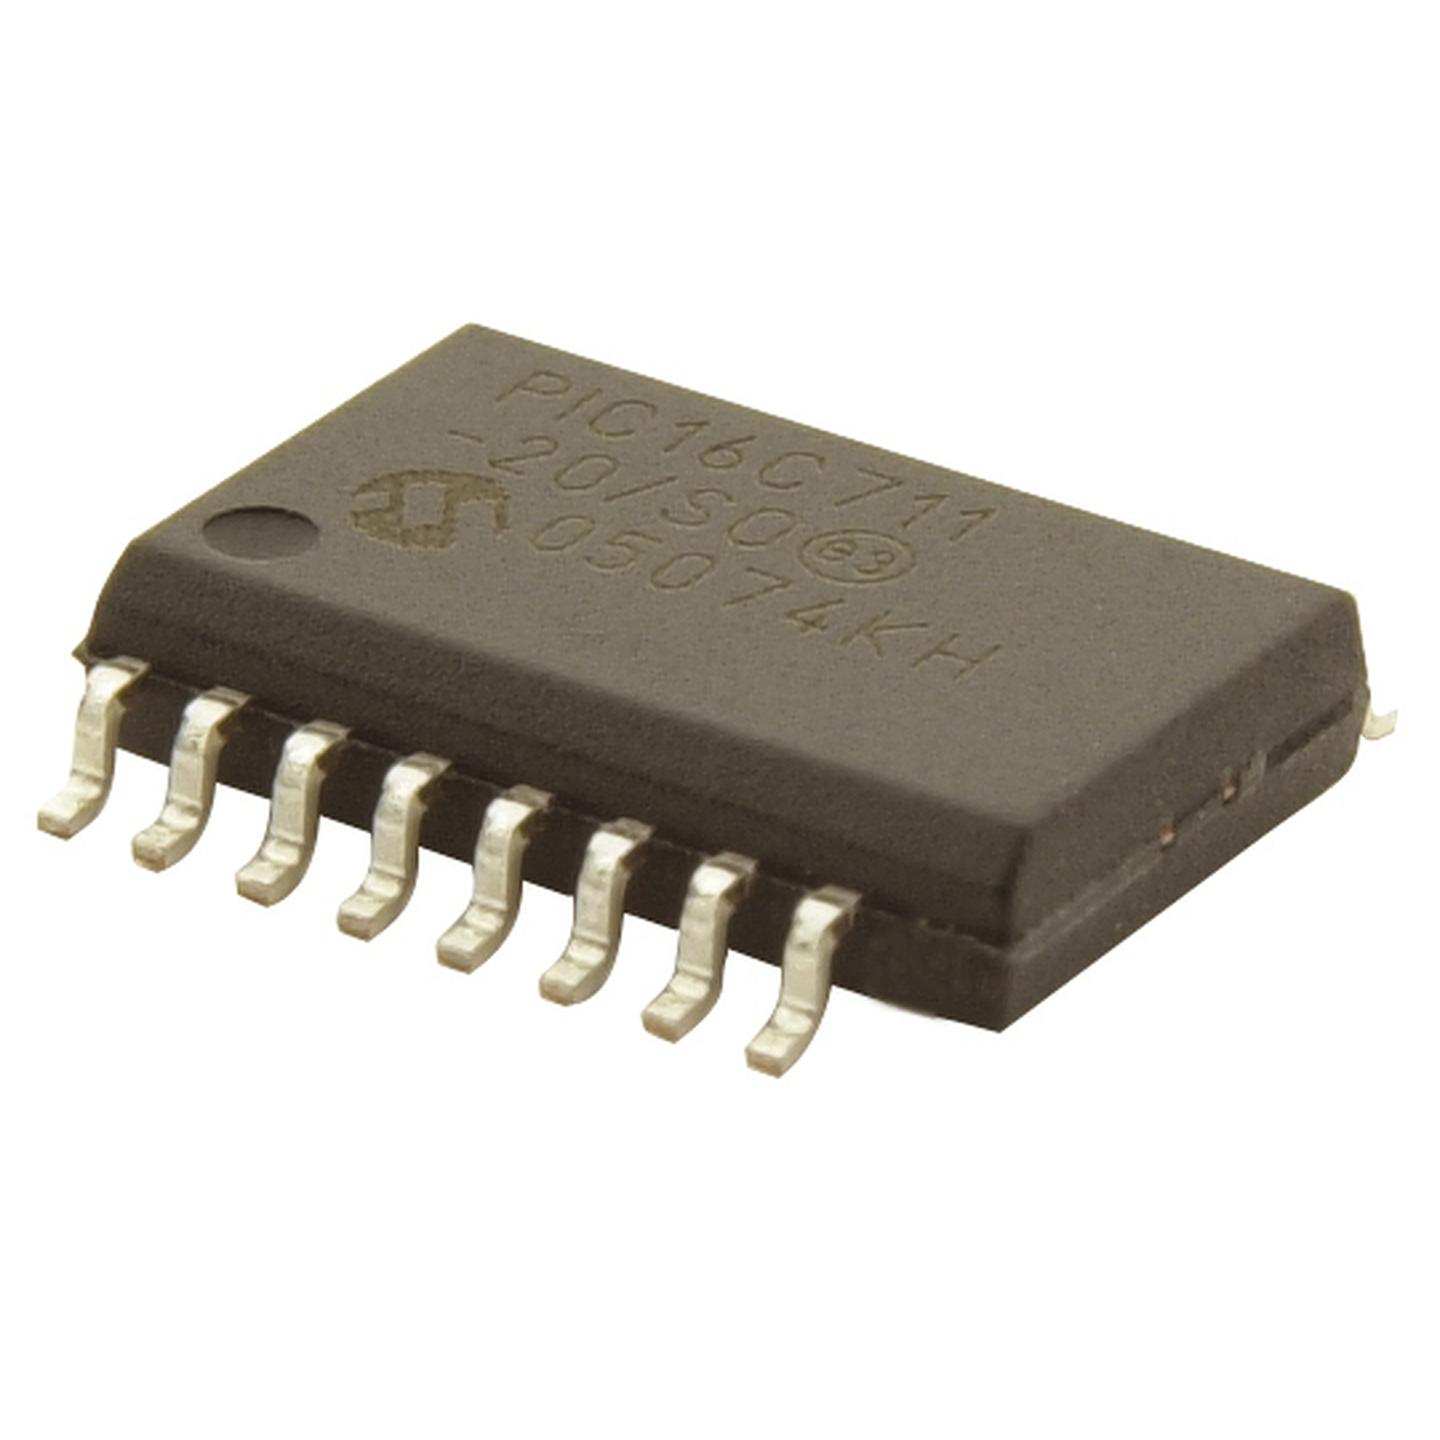 SMD IC LM324M S0IC14 - Pack 10